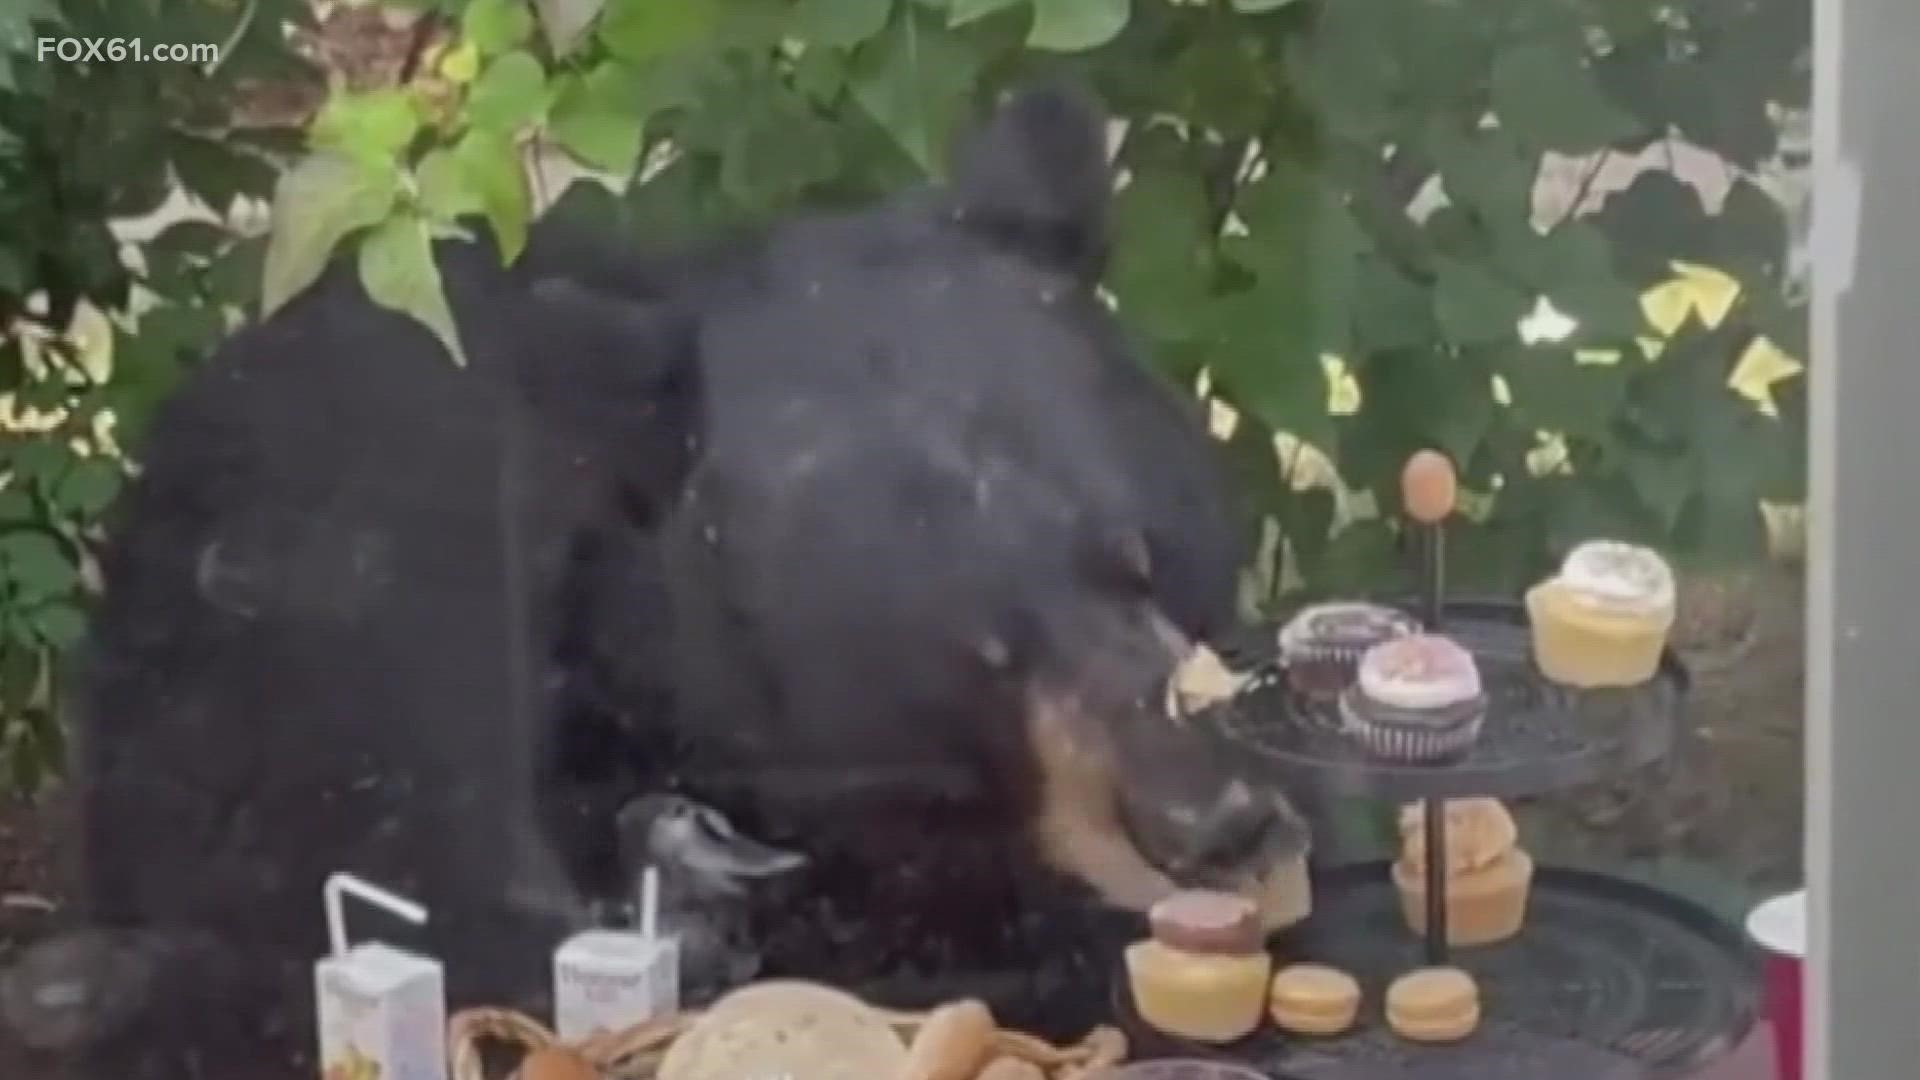 From a house window, the bear could be seen at the picnic table where the kids were moments before, devouring the cupcakes on the two-tiered tower.